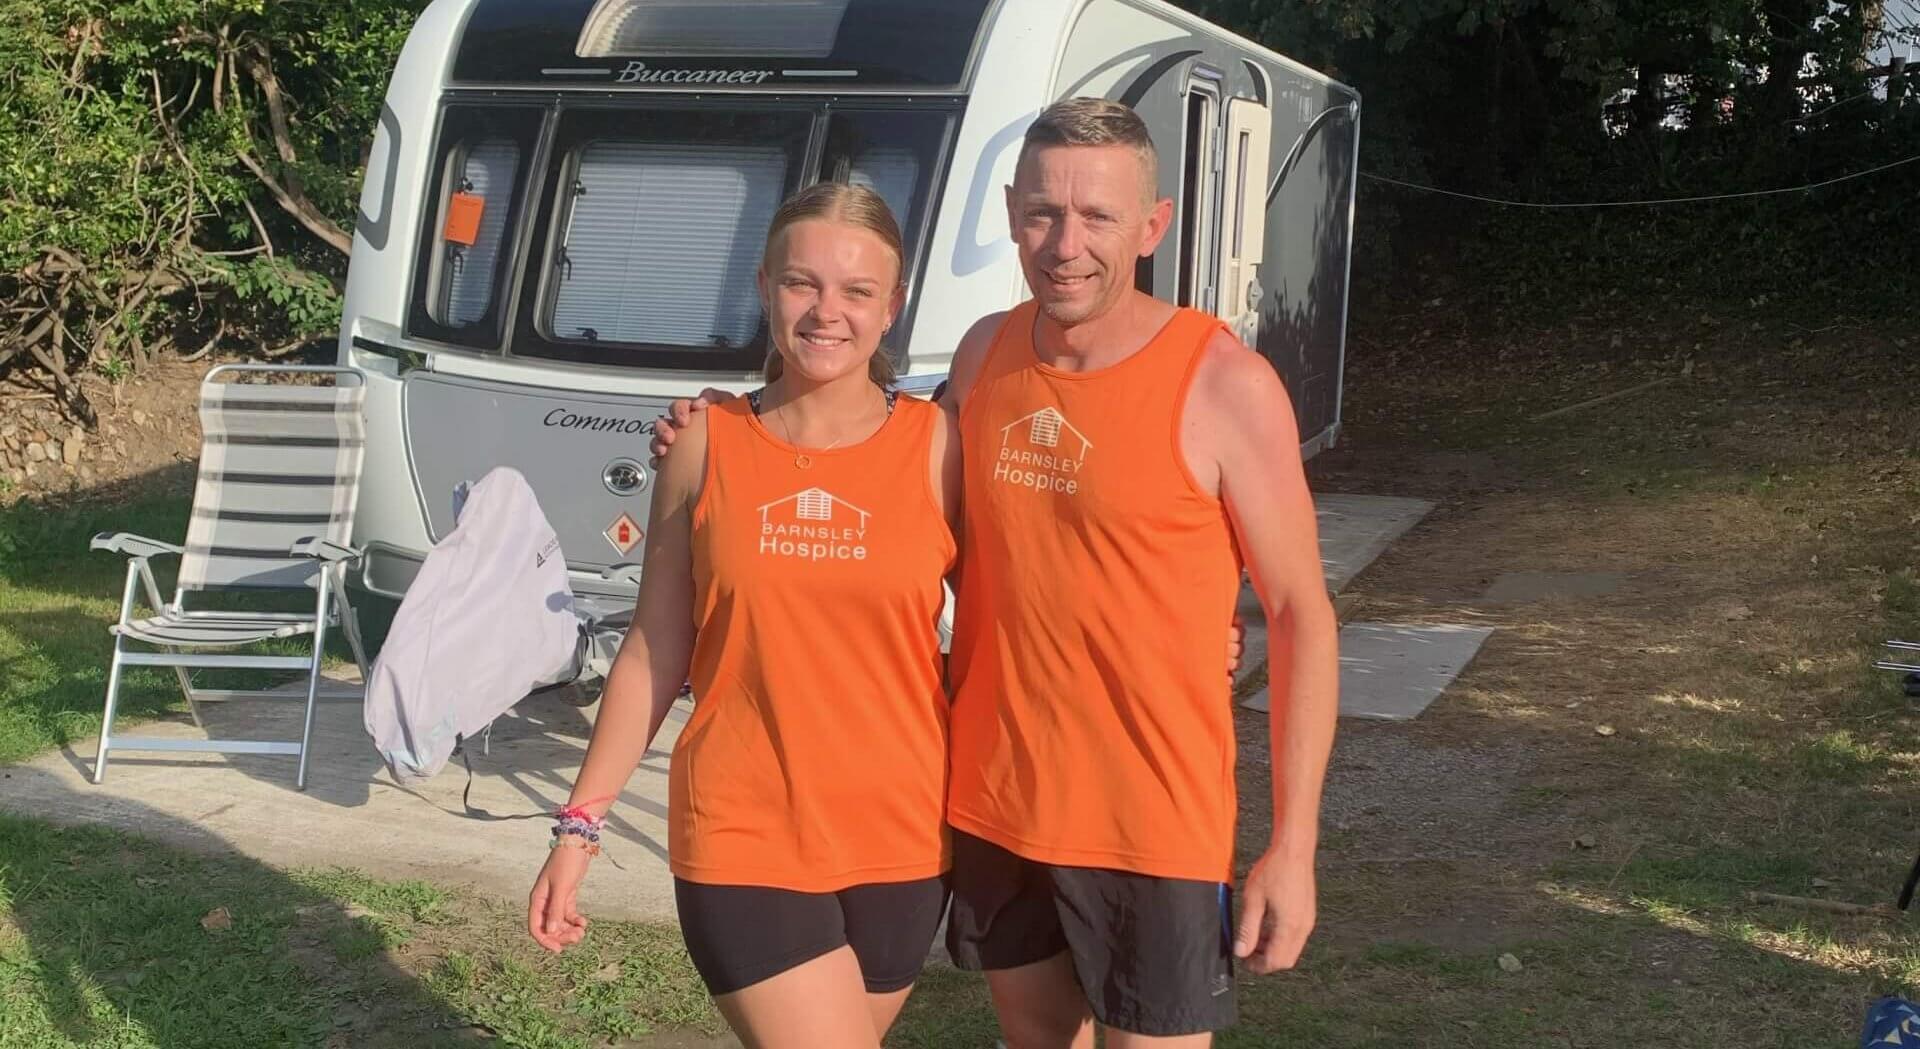 Photo of Amy and her dad Ian, wearing orange Barnsley Hospice running vests.